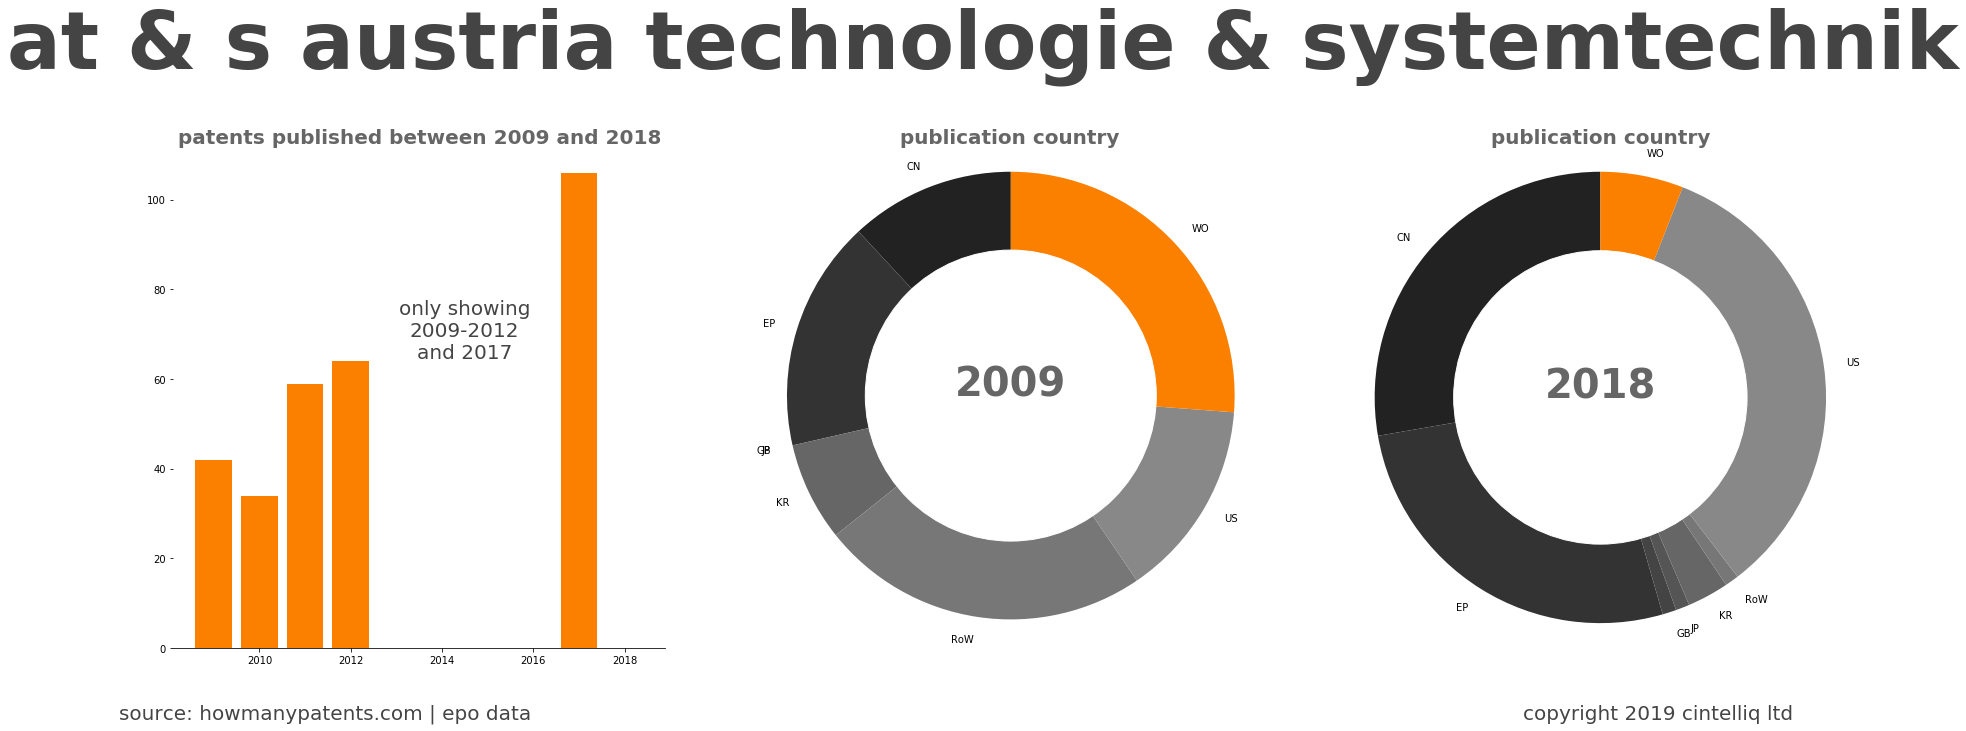 summary of patents for At & S Austria Technologie & Systemtechnik